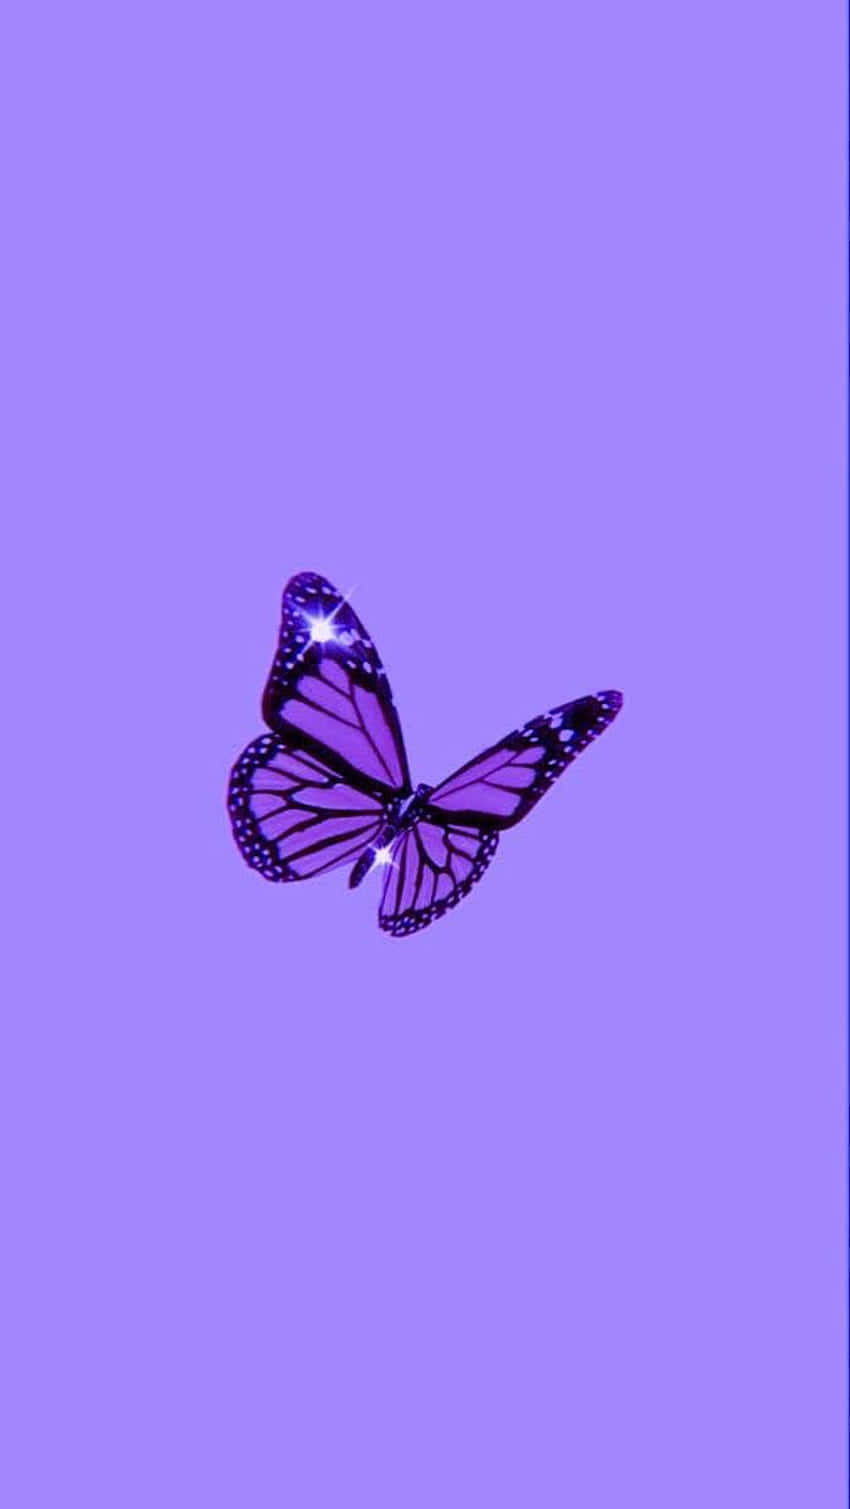 "Feel blue? Let this vibrant purple butterfly brighten your day!" Wallpaper